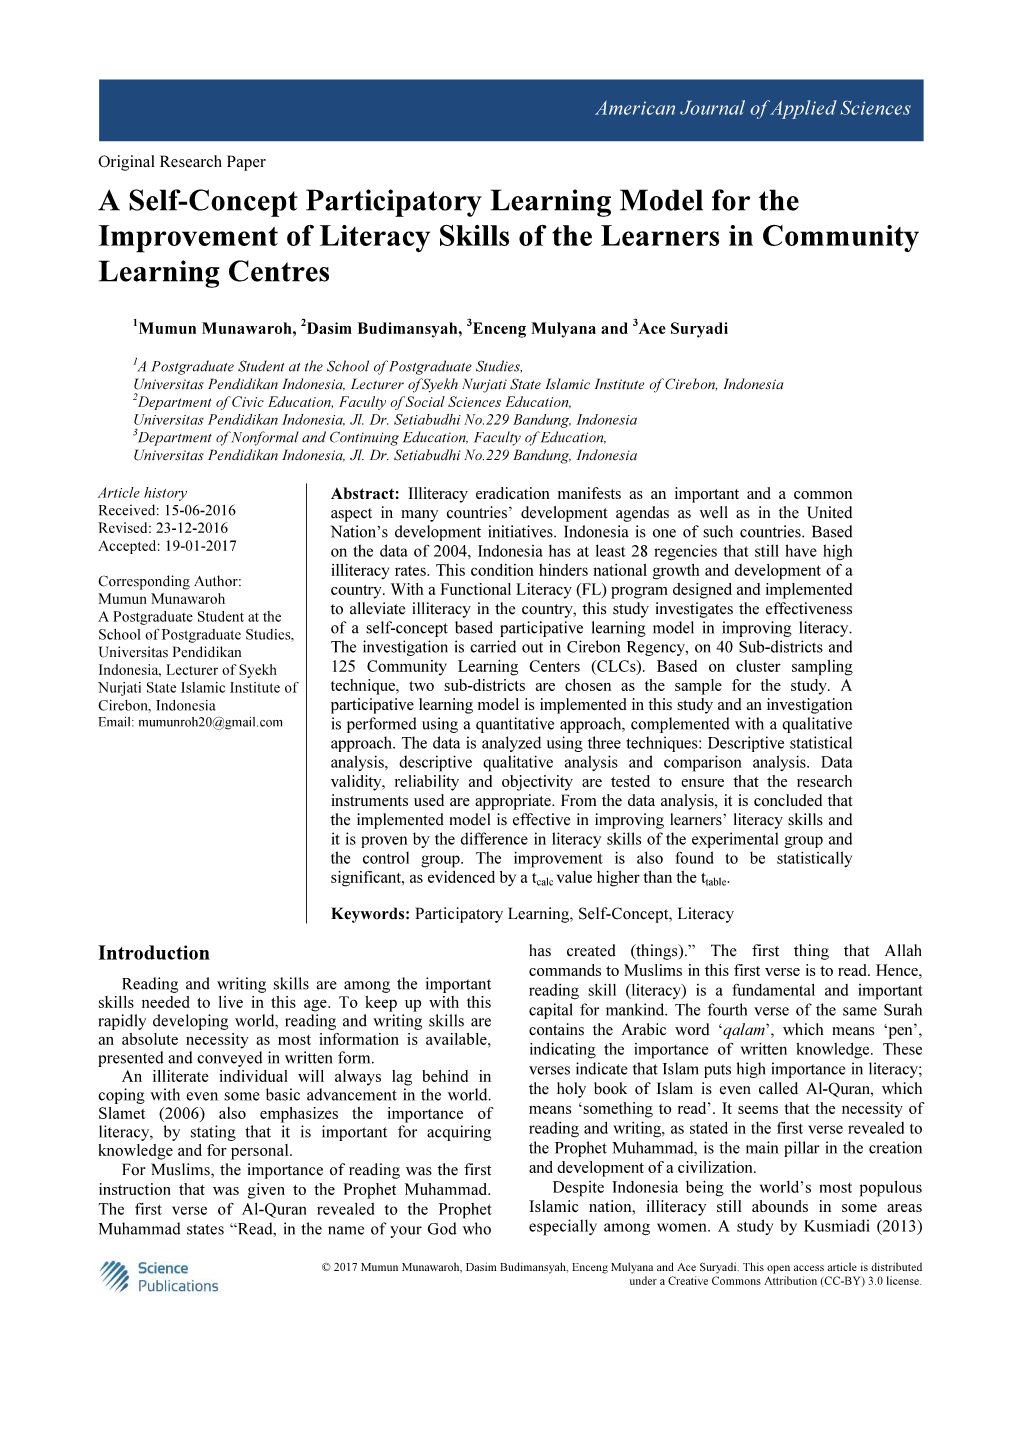 A Self-Concept Participatory Learning Model for the Improvement of Literacy Skills of the Learners in Community Learning Centres